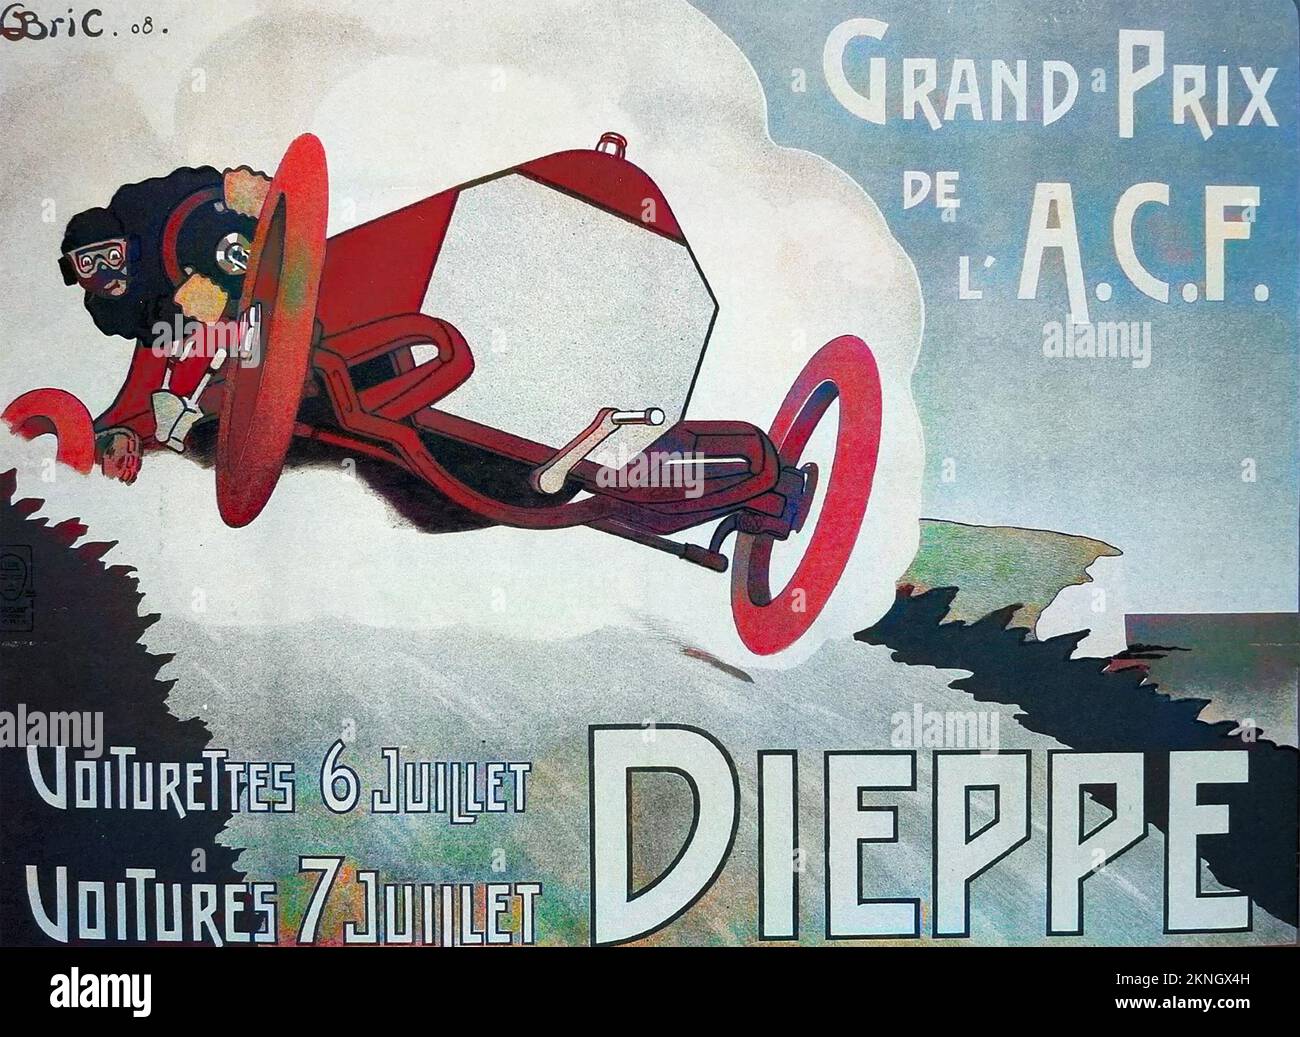 DIEPPE GRAND PRIX 1908  Despite the humour in this  image in the actual race a driver and his mechanic died when their car overturned - the first fatalities in Grand Prix history. Stock Photo